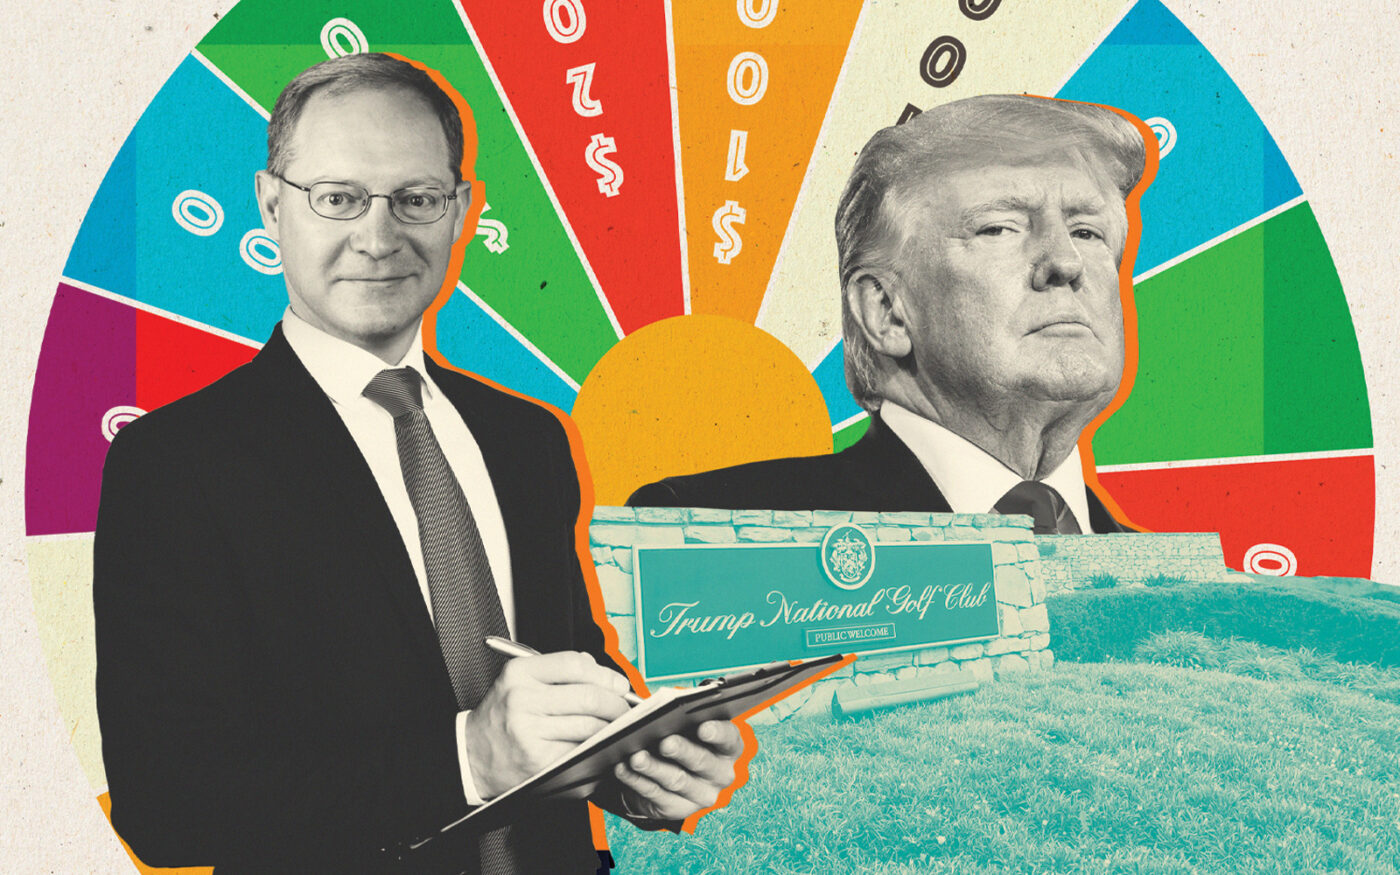 Cushman & Wakefield's Richard Zbraneck faced pressure from the Trump Organization when appraising the company's Los Angeles golf course, New York's attorney general claimed. (Photo-illustration by Ilya Hourie/The Real Deal)